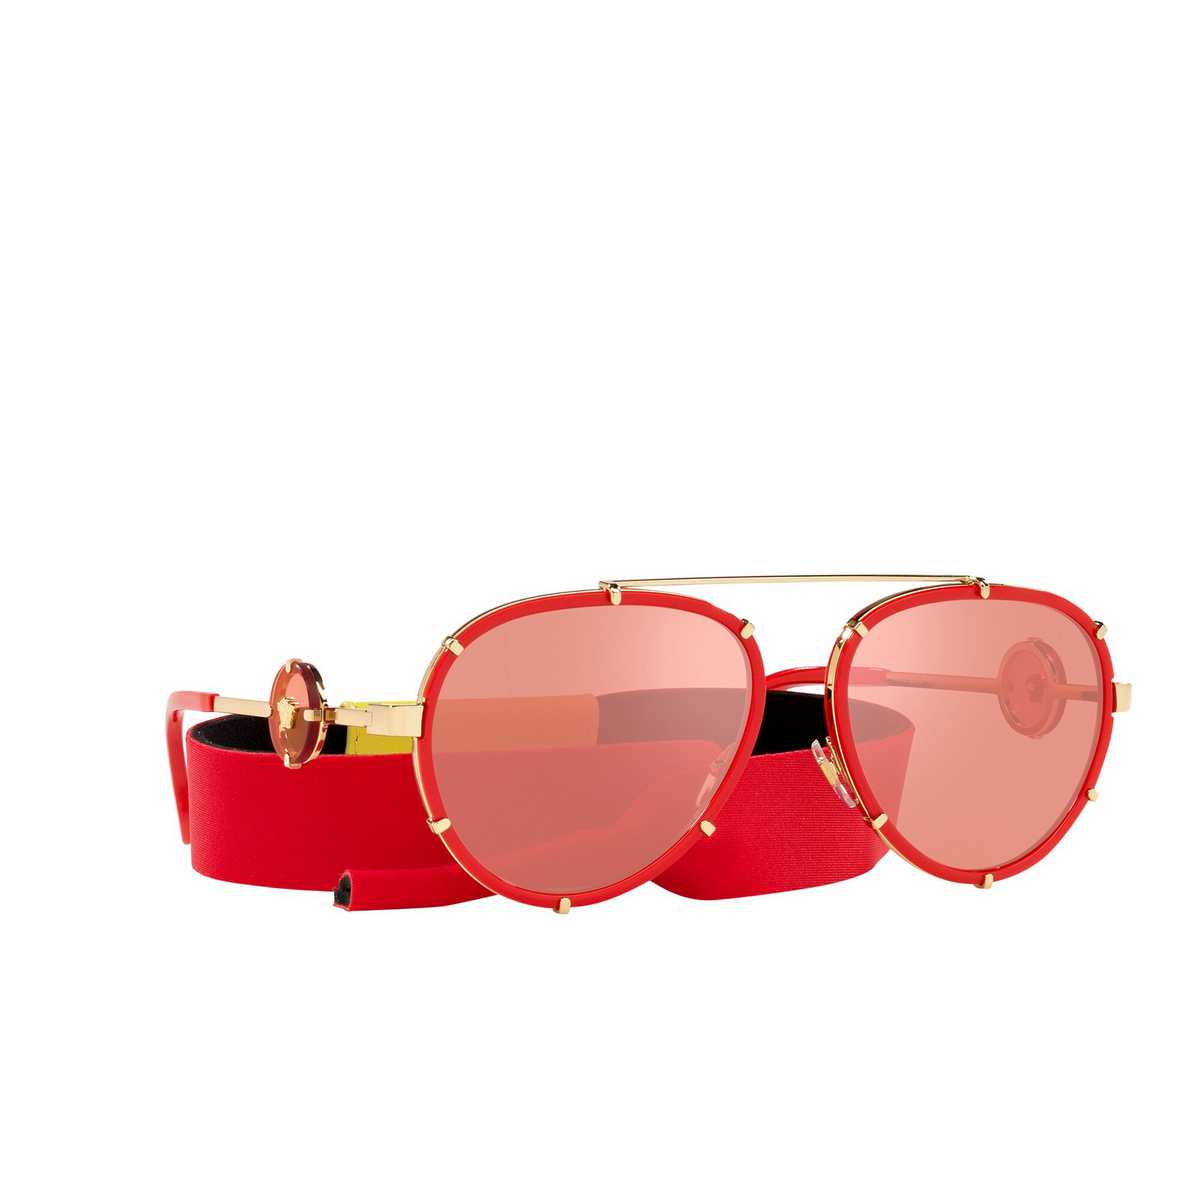 Versace® Sunglasses: VE2232 color Red 1472C8 - front view.